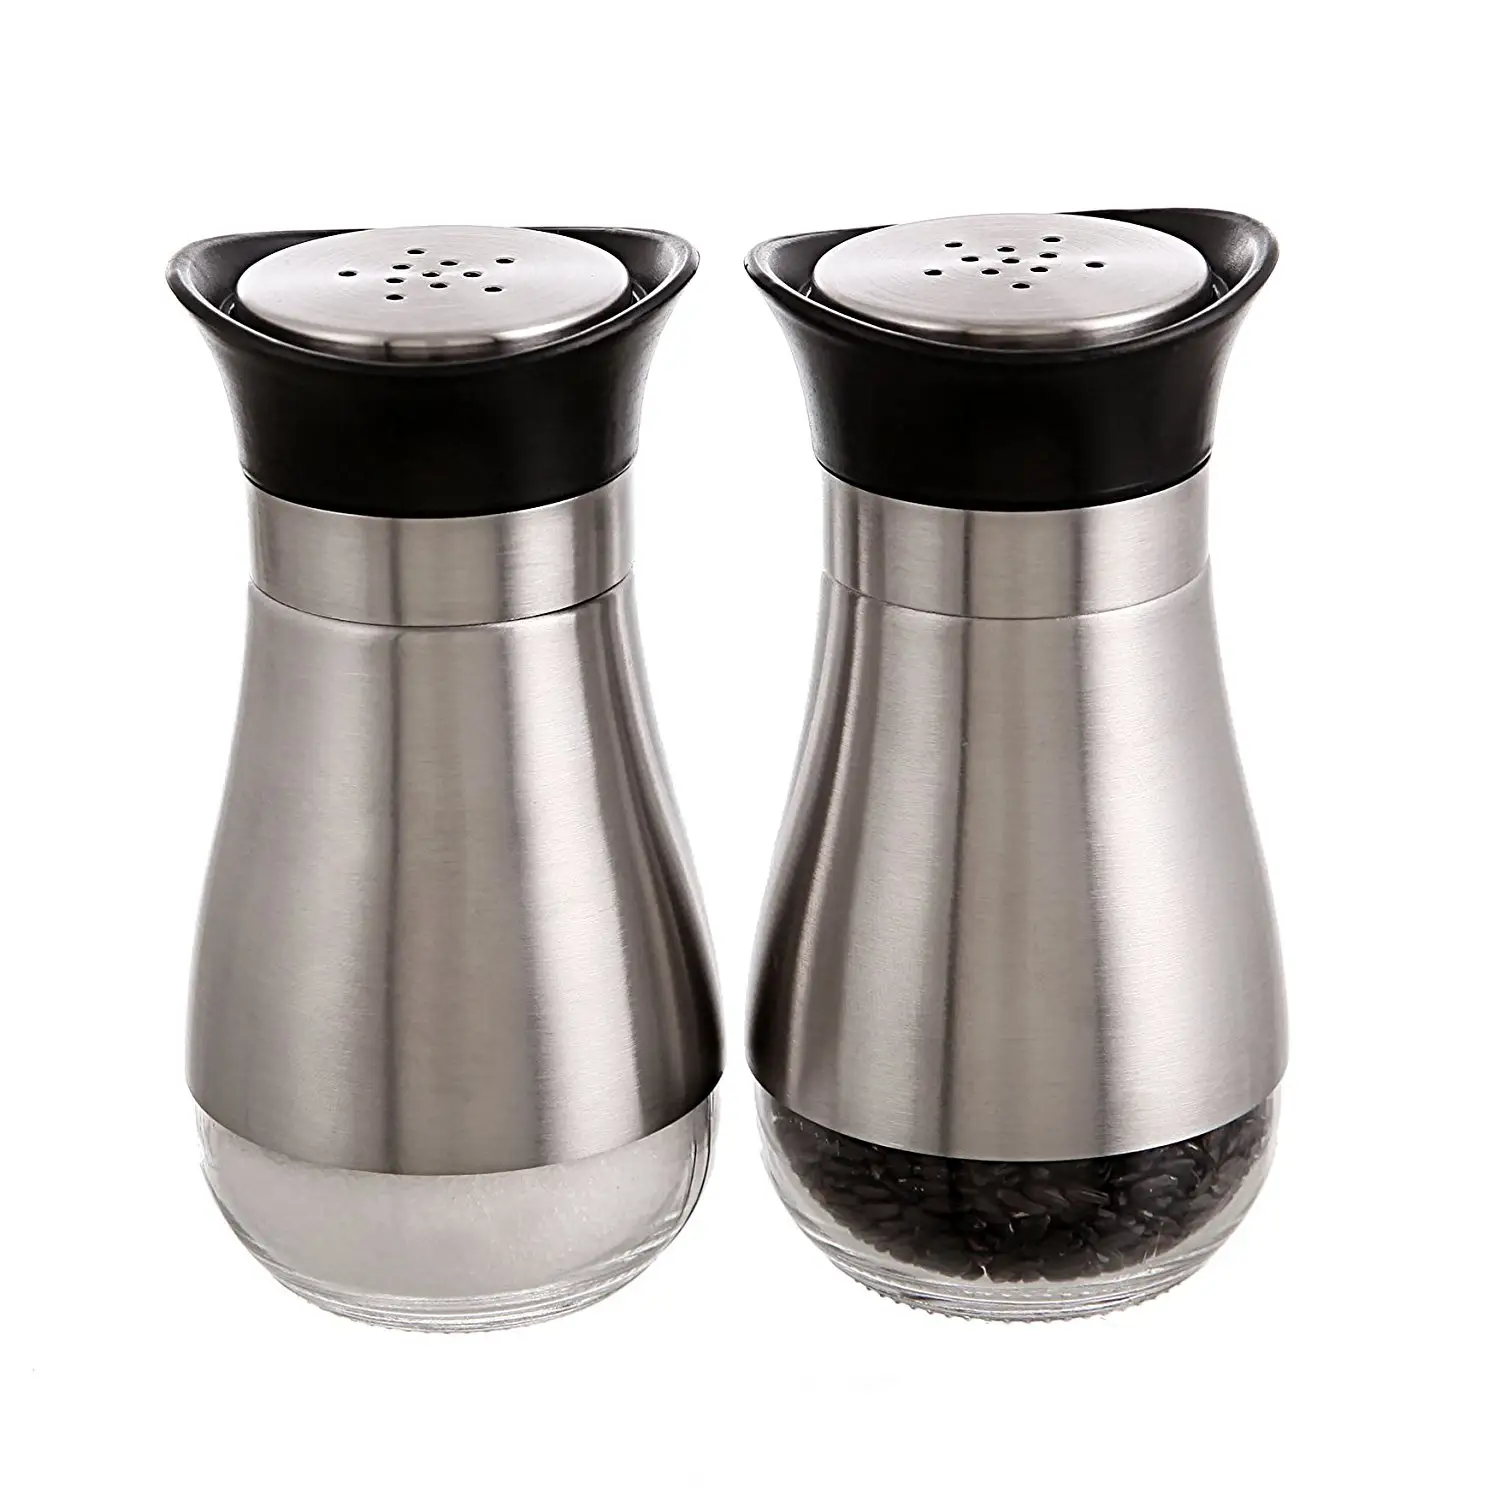 In Stock Stainless Steel Spice Jar Glass 120ml Salt and Pepper Shakers